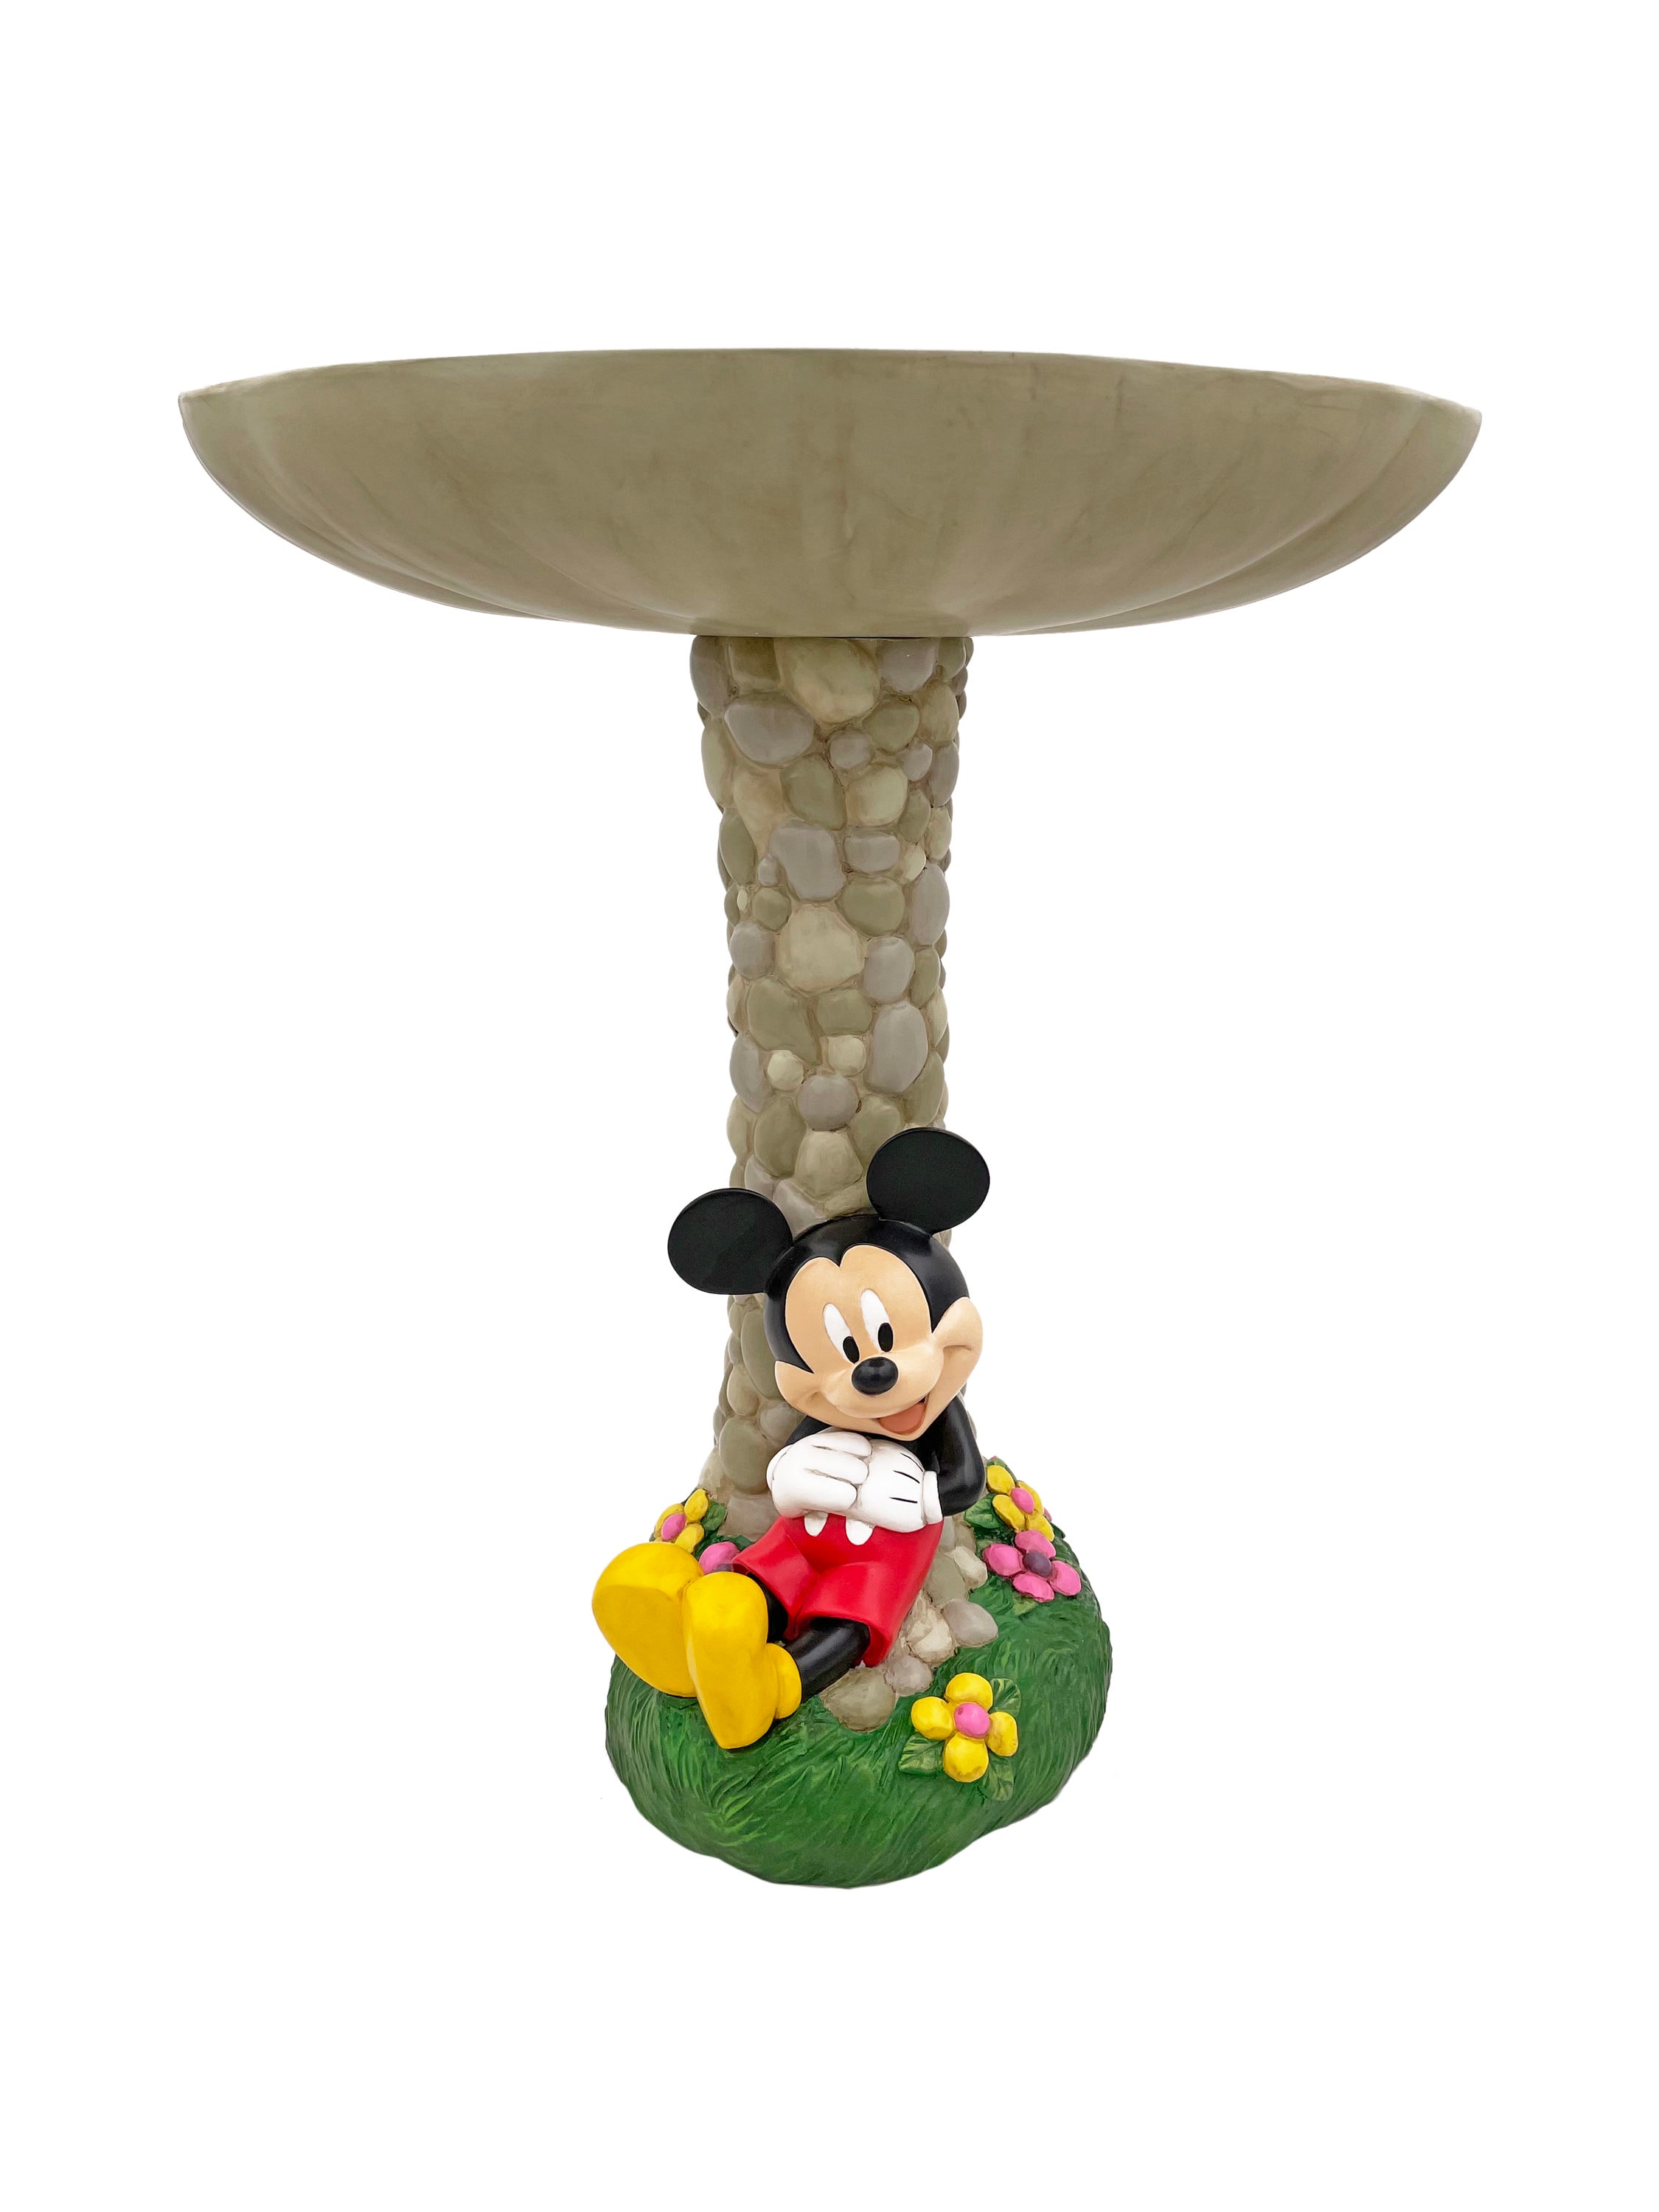 Mickey and Minnie Mouse 8 Resin Garden Pot Stakes Set of 2 Disney